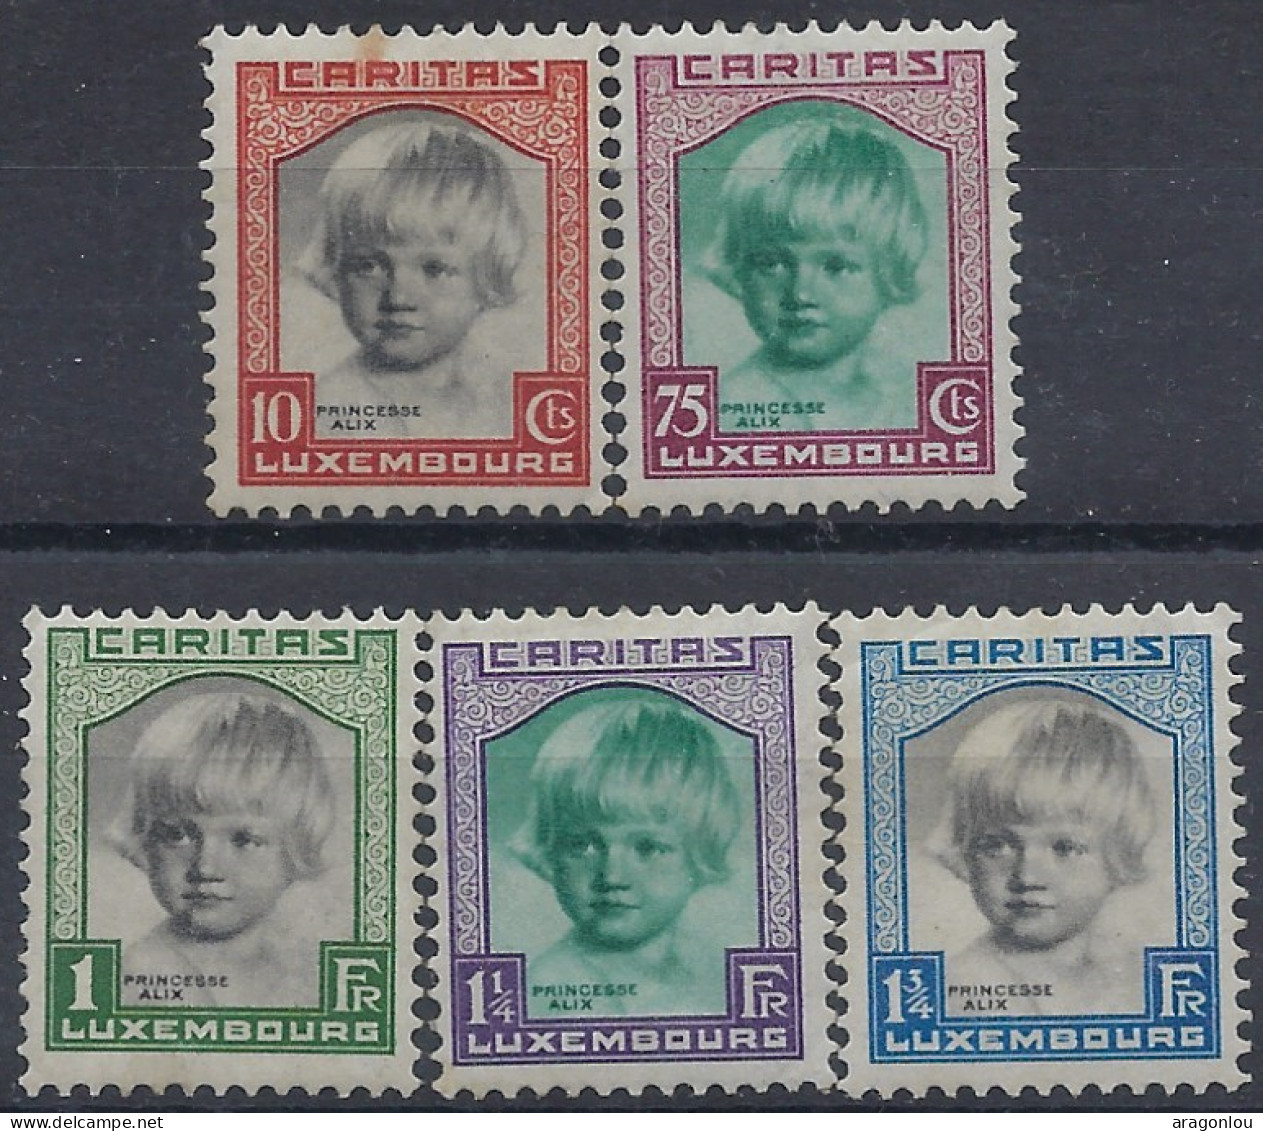 Luxembourg - Luxemburg - Timbres  1931  Série    Princesse Alice    Caritas °   VC.100,- - Usados